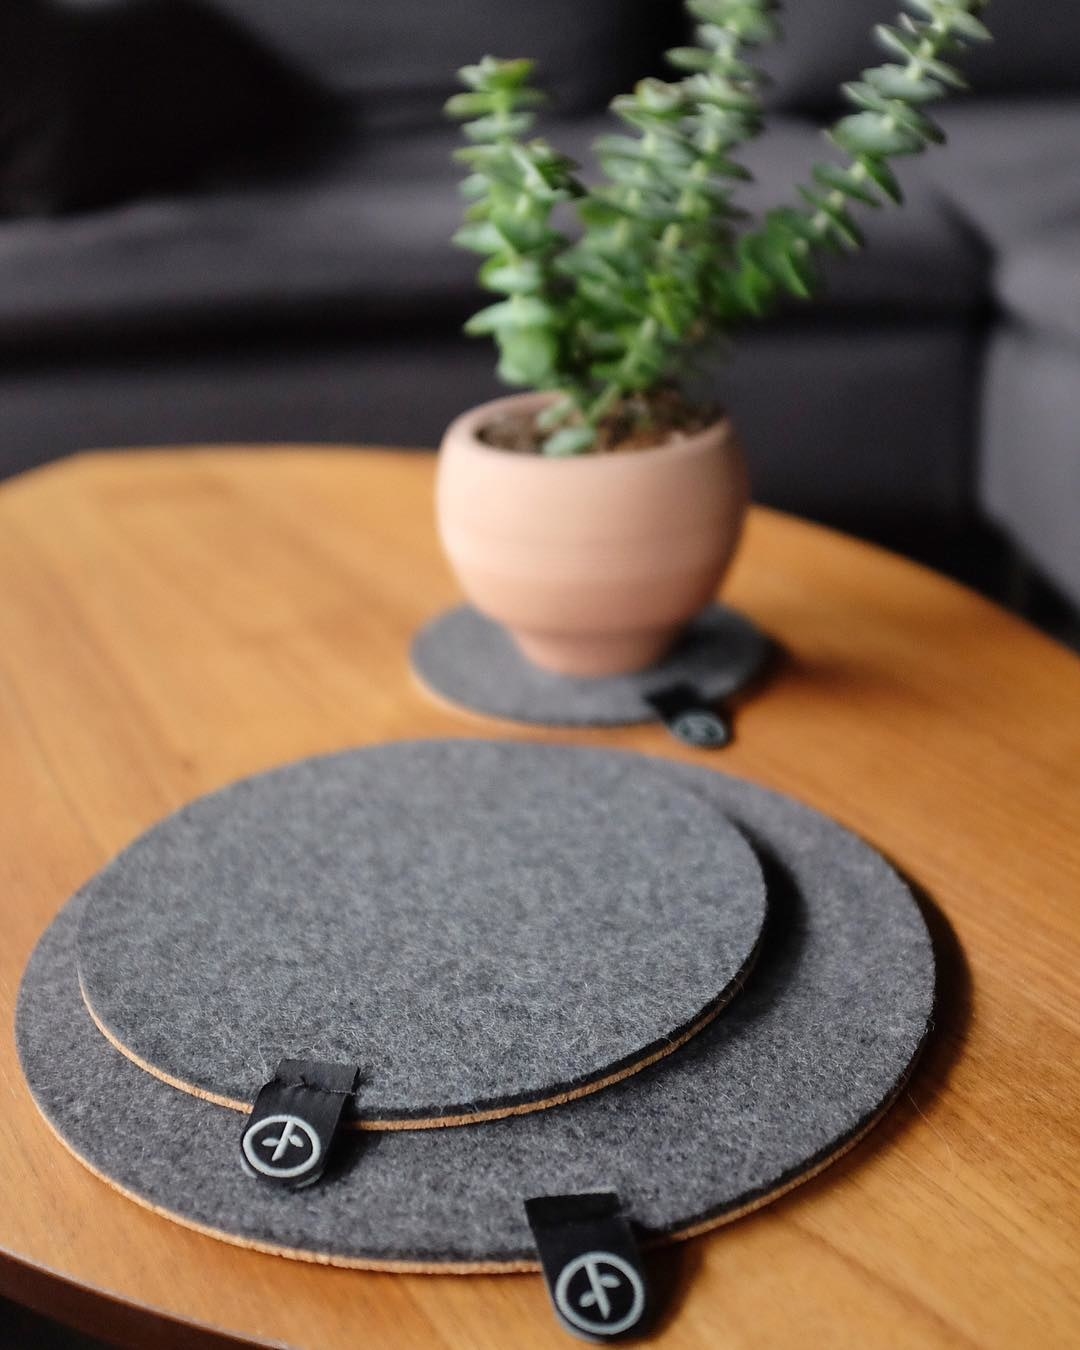 A plant pot on a trivet and two trivets on a table